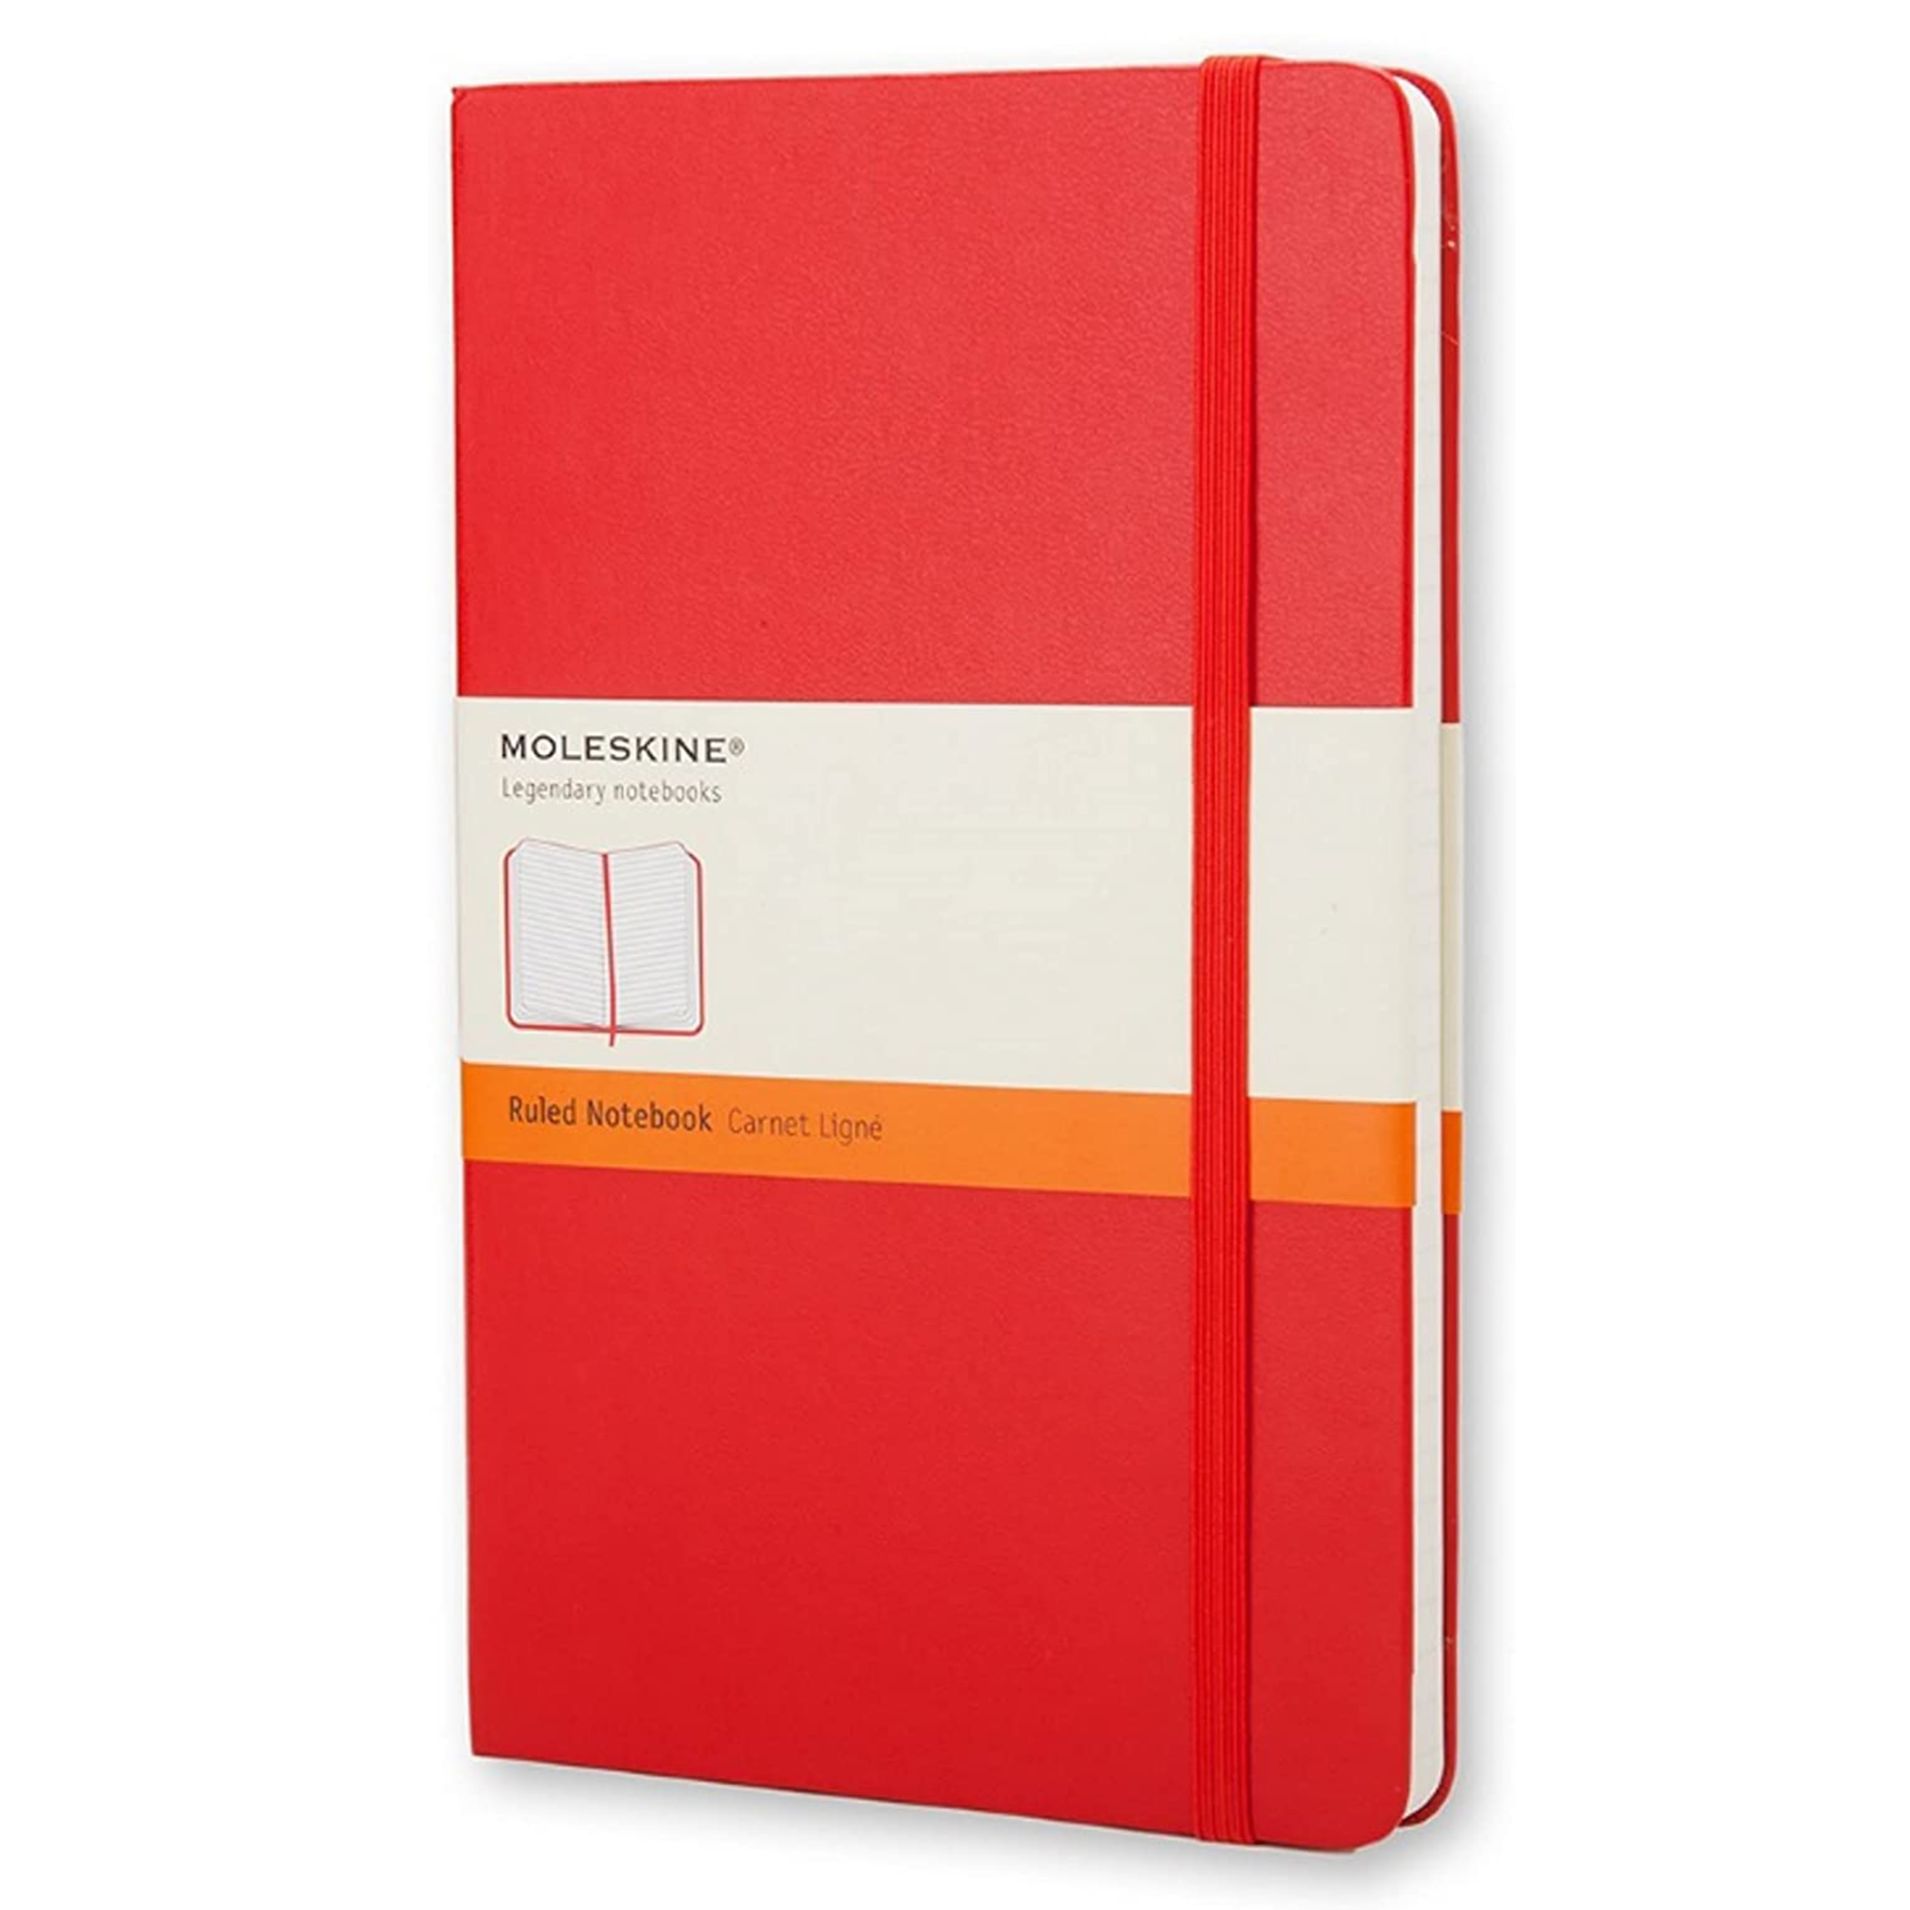 Moleskine Classic Notebook, Extra Large, Ruled, Scarlet Red, Hard Cover (7.5 x 10)